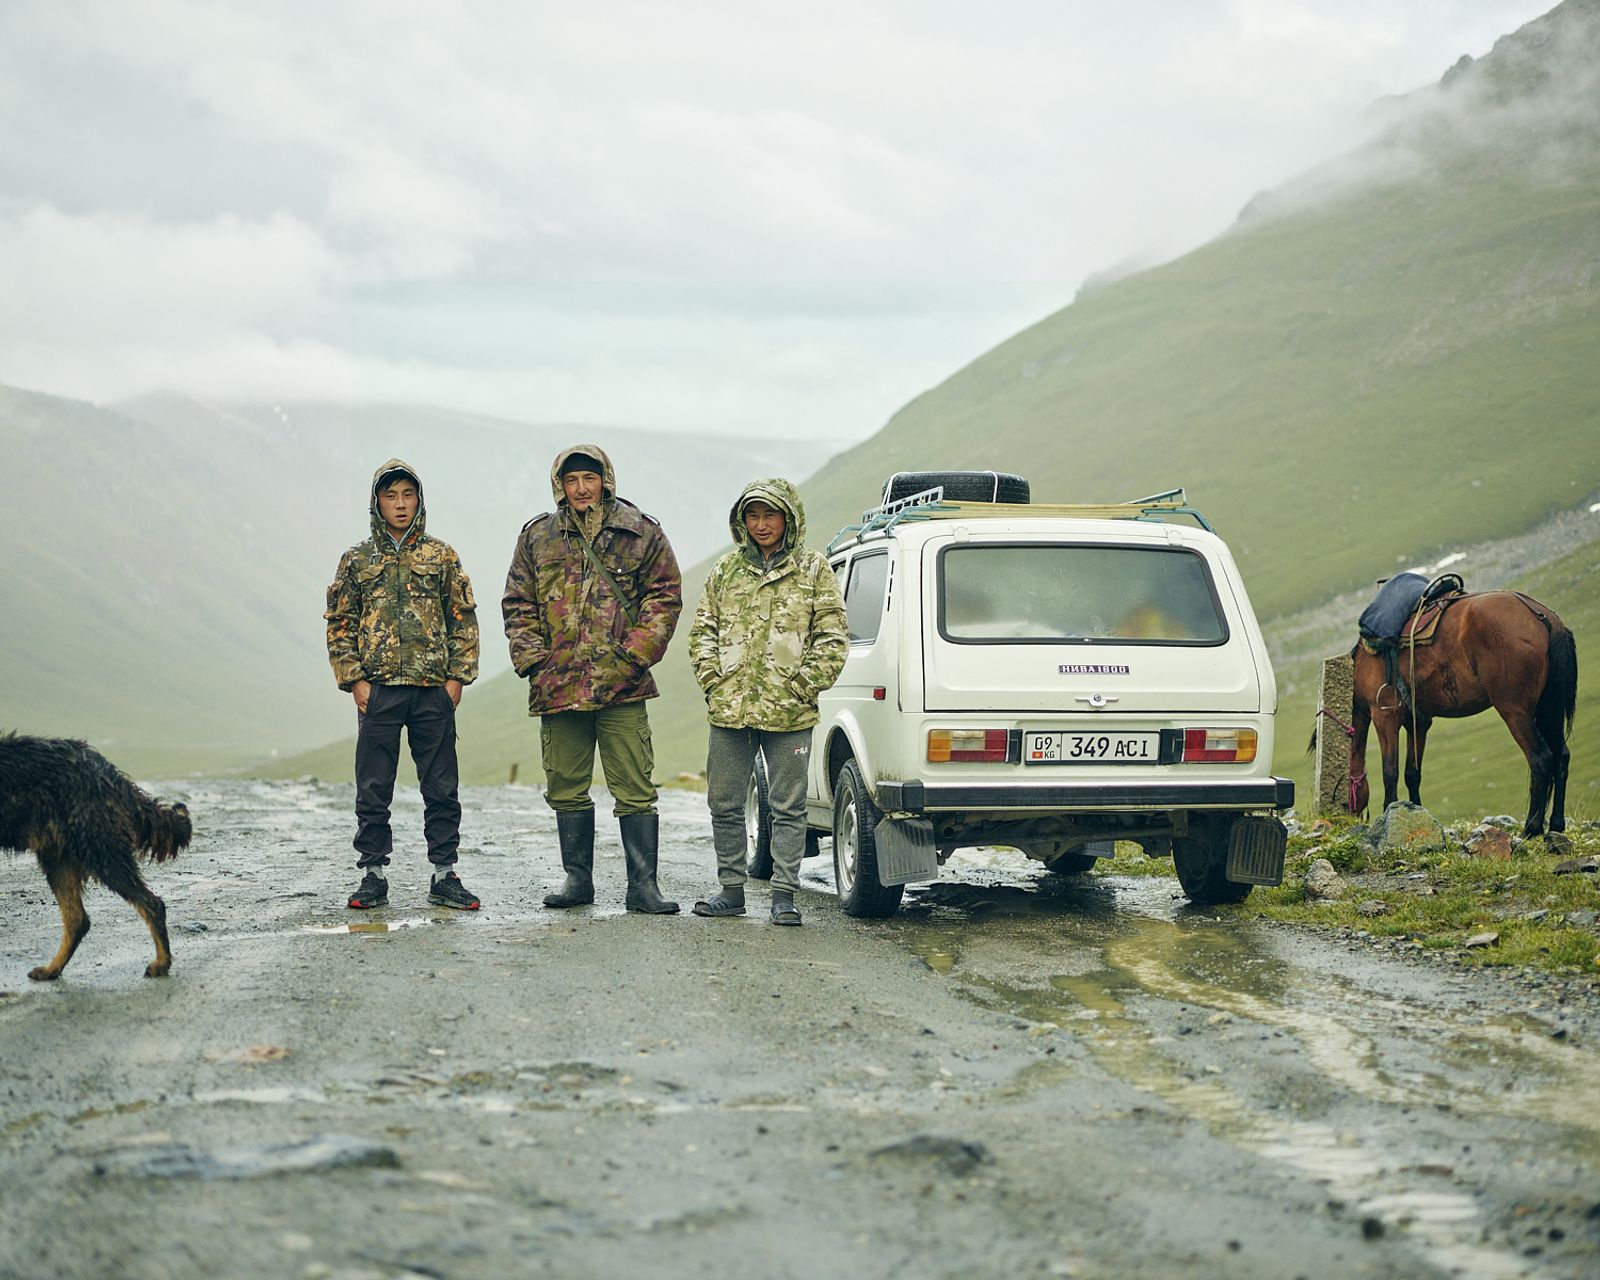 © Louise Amelie - Image from the MISSING MEMBER - Kyrgyzstan, A Country On The Move photography project